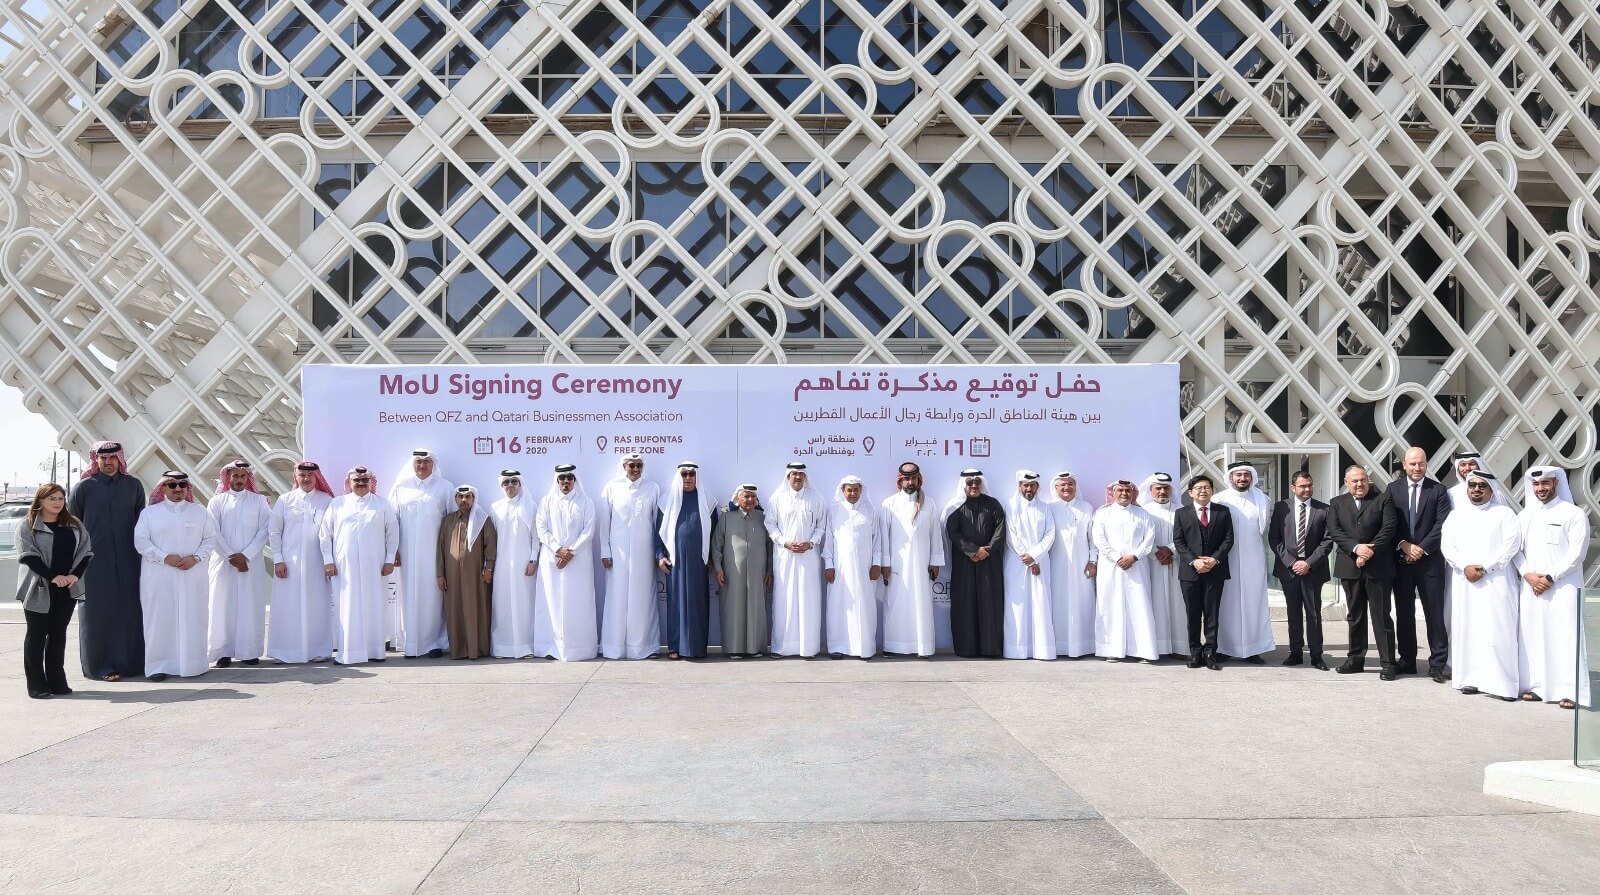 The Qatari Businessmen Association and Qatar Free Zones Authority signed an MOU To enhance cooperation and achieve mutual economic goals